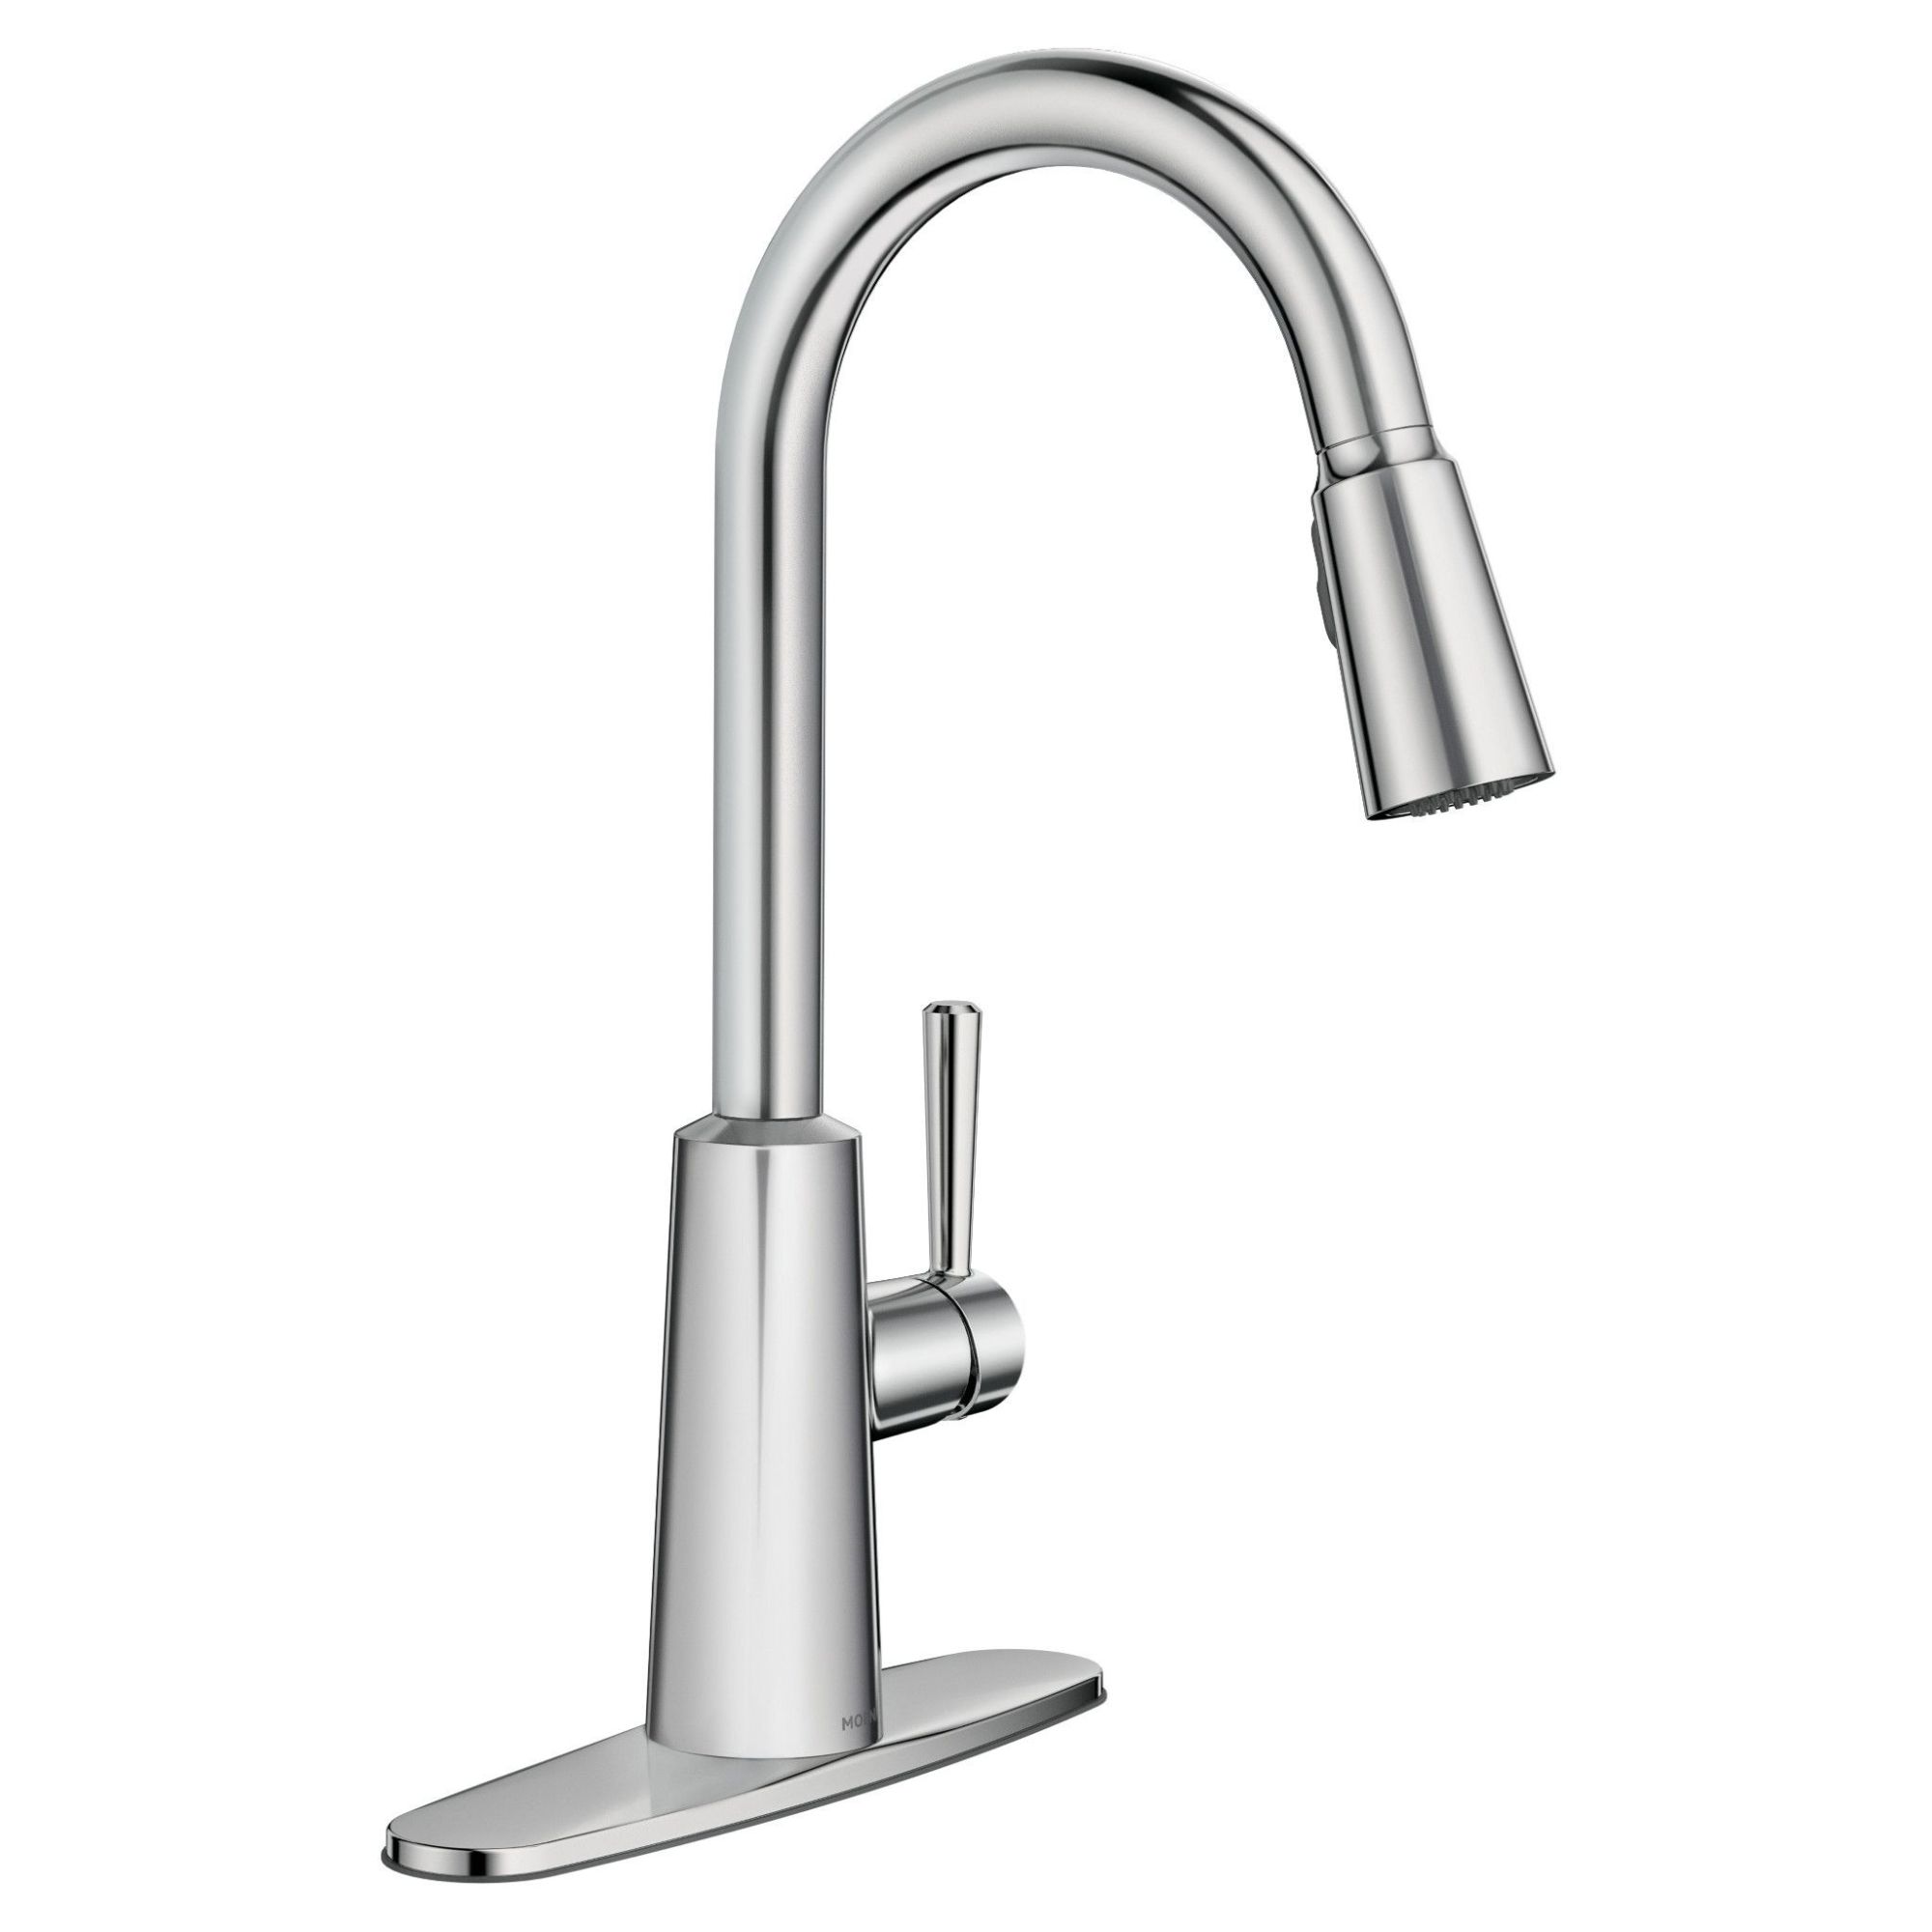 Moen Riley Chrome Single Handle Pull-down Kitchen Faucet in the Kitchen ...